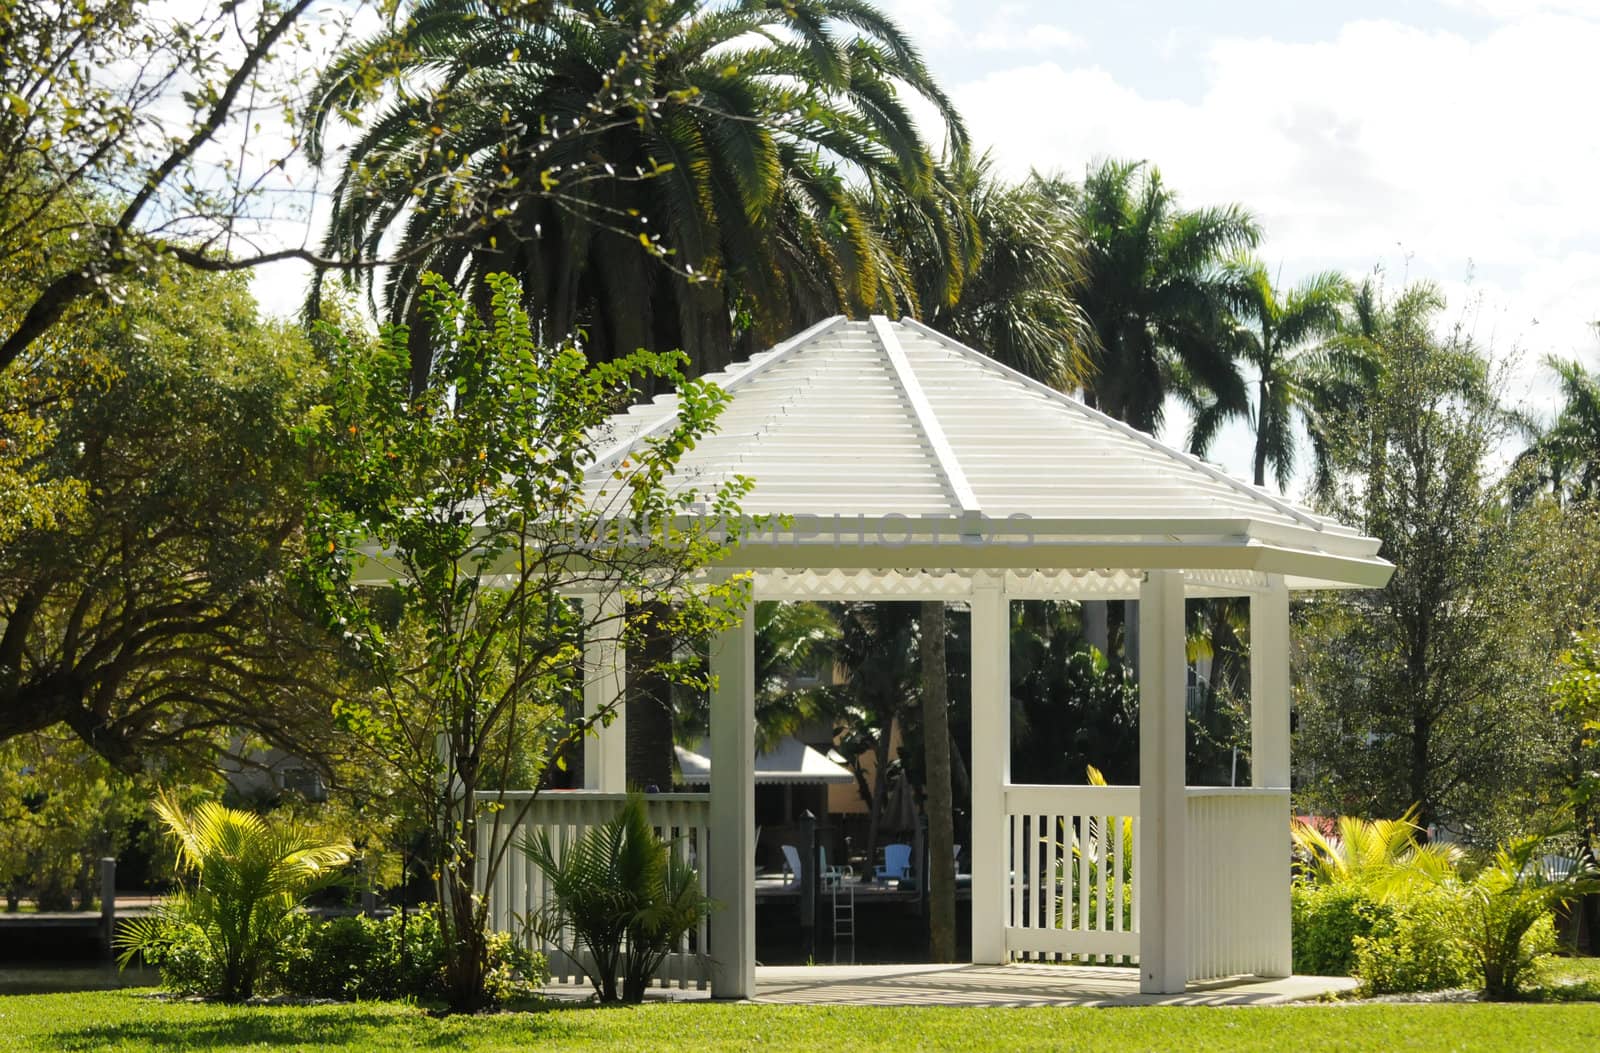 gazebo outdoors in summer surrounded by trees and nature